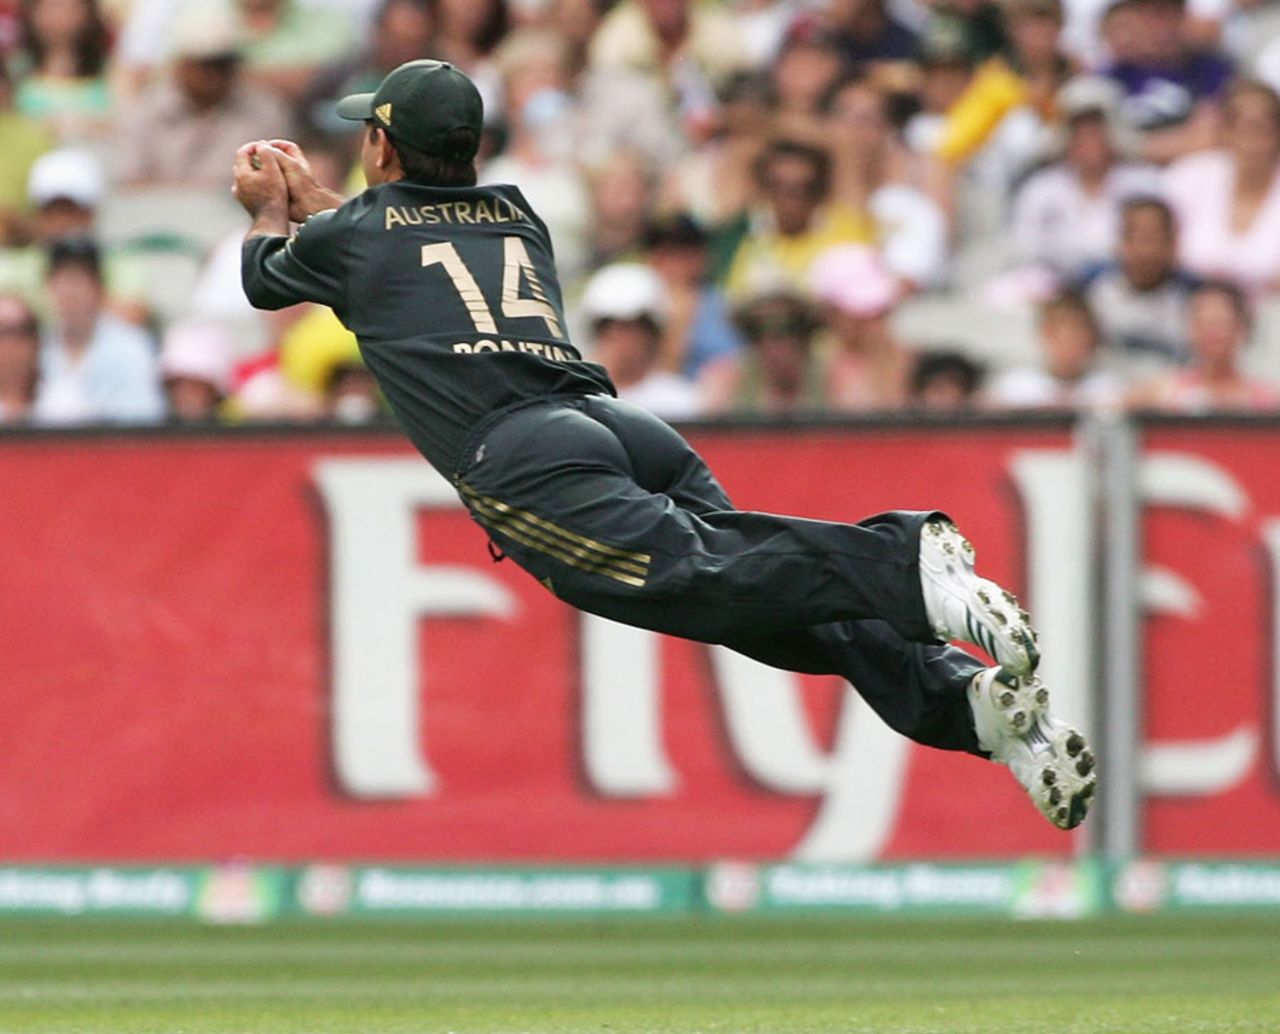 Ricky Ponting flies and catches Jon Lewis, Australia v England, Commonwealth Bank Series, 1st Match, Melbourne, January 12, 2007